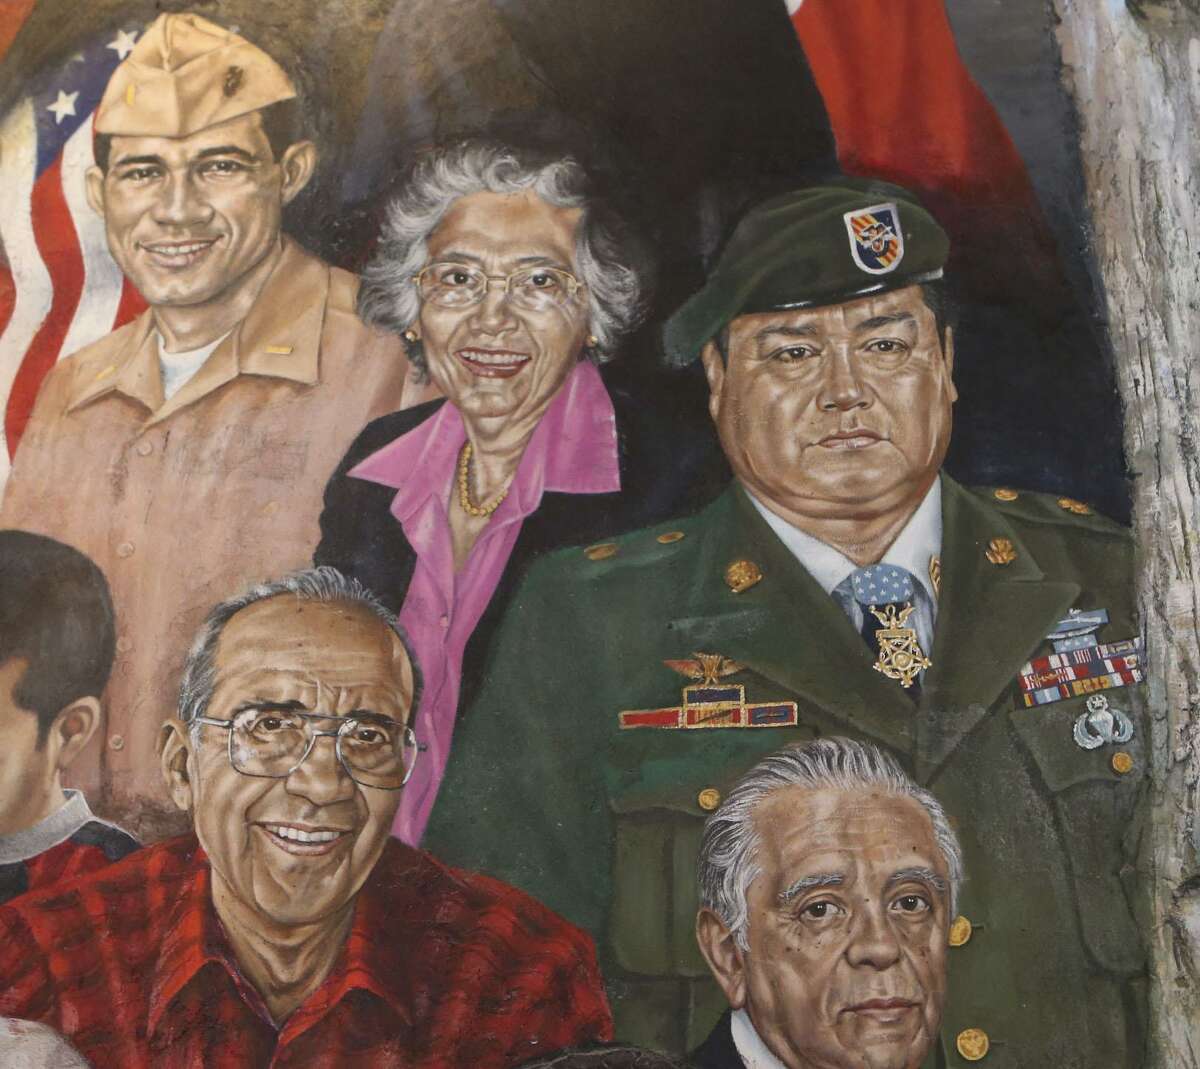 A mural at Mi Tierra restaurant features portraits of prominent people from San Antonio or with ties to San Antonio, South Texas and Mexico. Some of the portraits feature Hispanics with ties to the military such as Master Sergeants Cleto Rodriguez (not pictured) and Roy P. Benavidez (upper right). Also featured is U.S. Rep. Frank Tejeda (upper left), a decorated veteran of the Vietnam War.